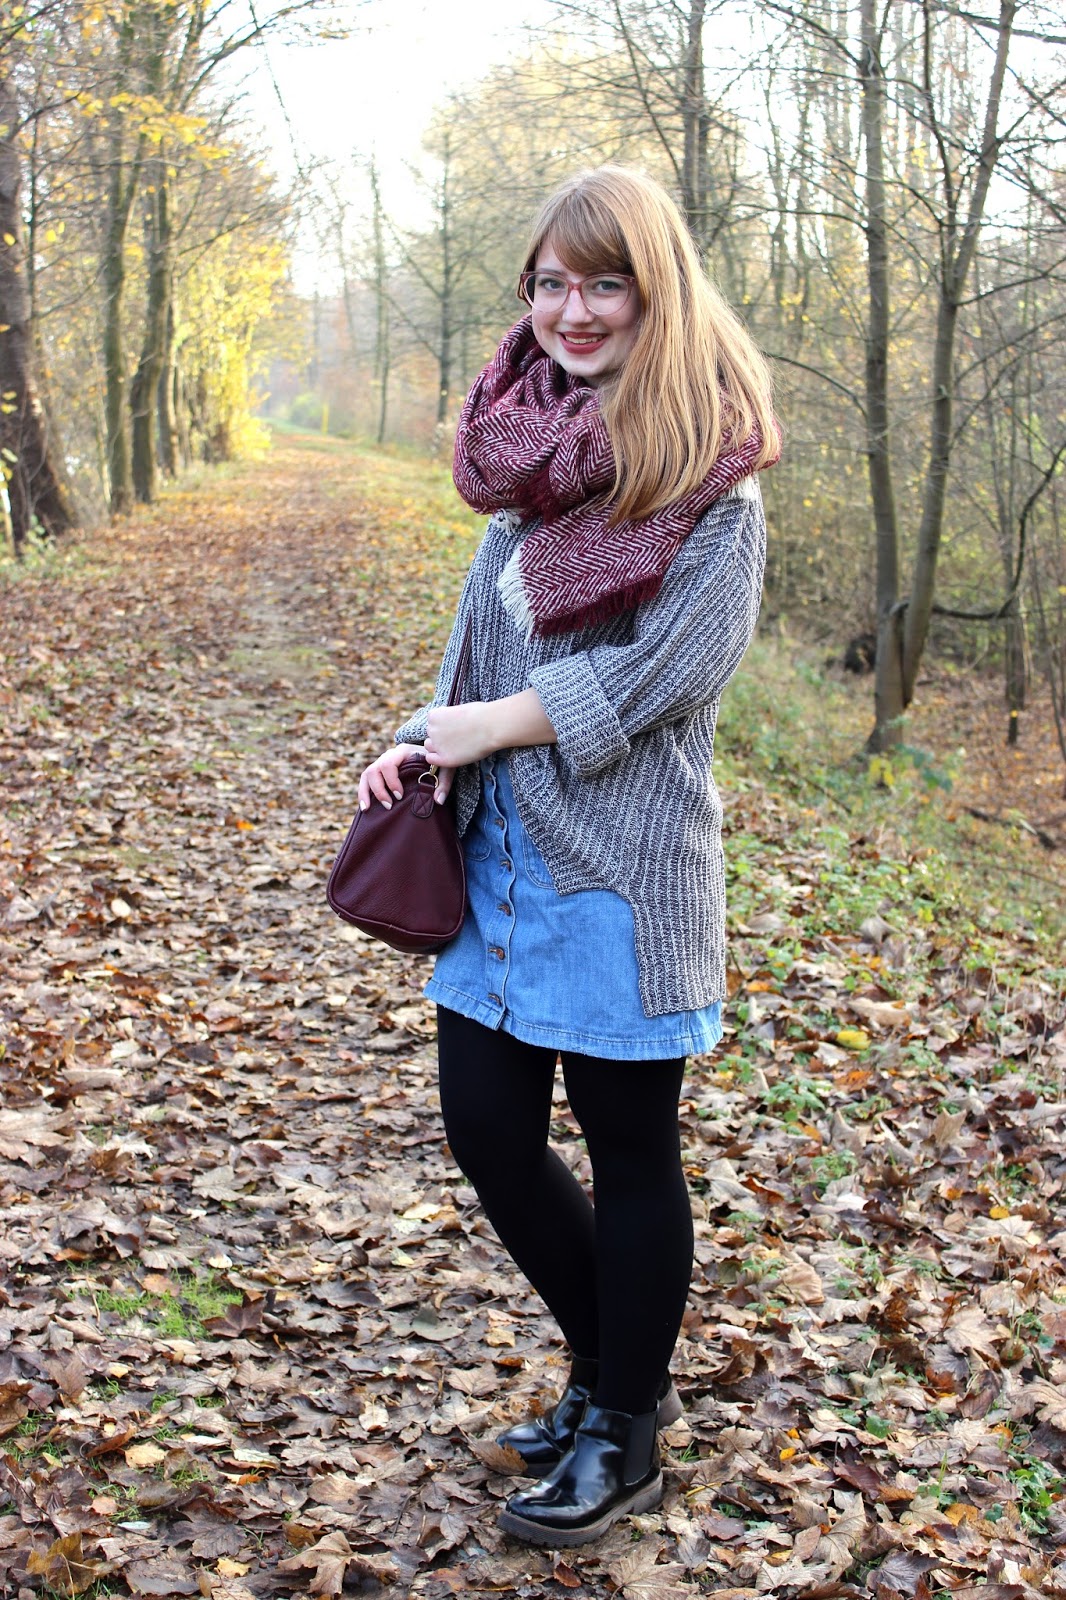 Keep Calm And Eat More Cake Fashion Outfit Cozy Weekend Mit Jeansrock Und Granny Pulli